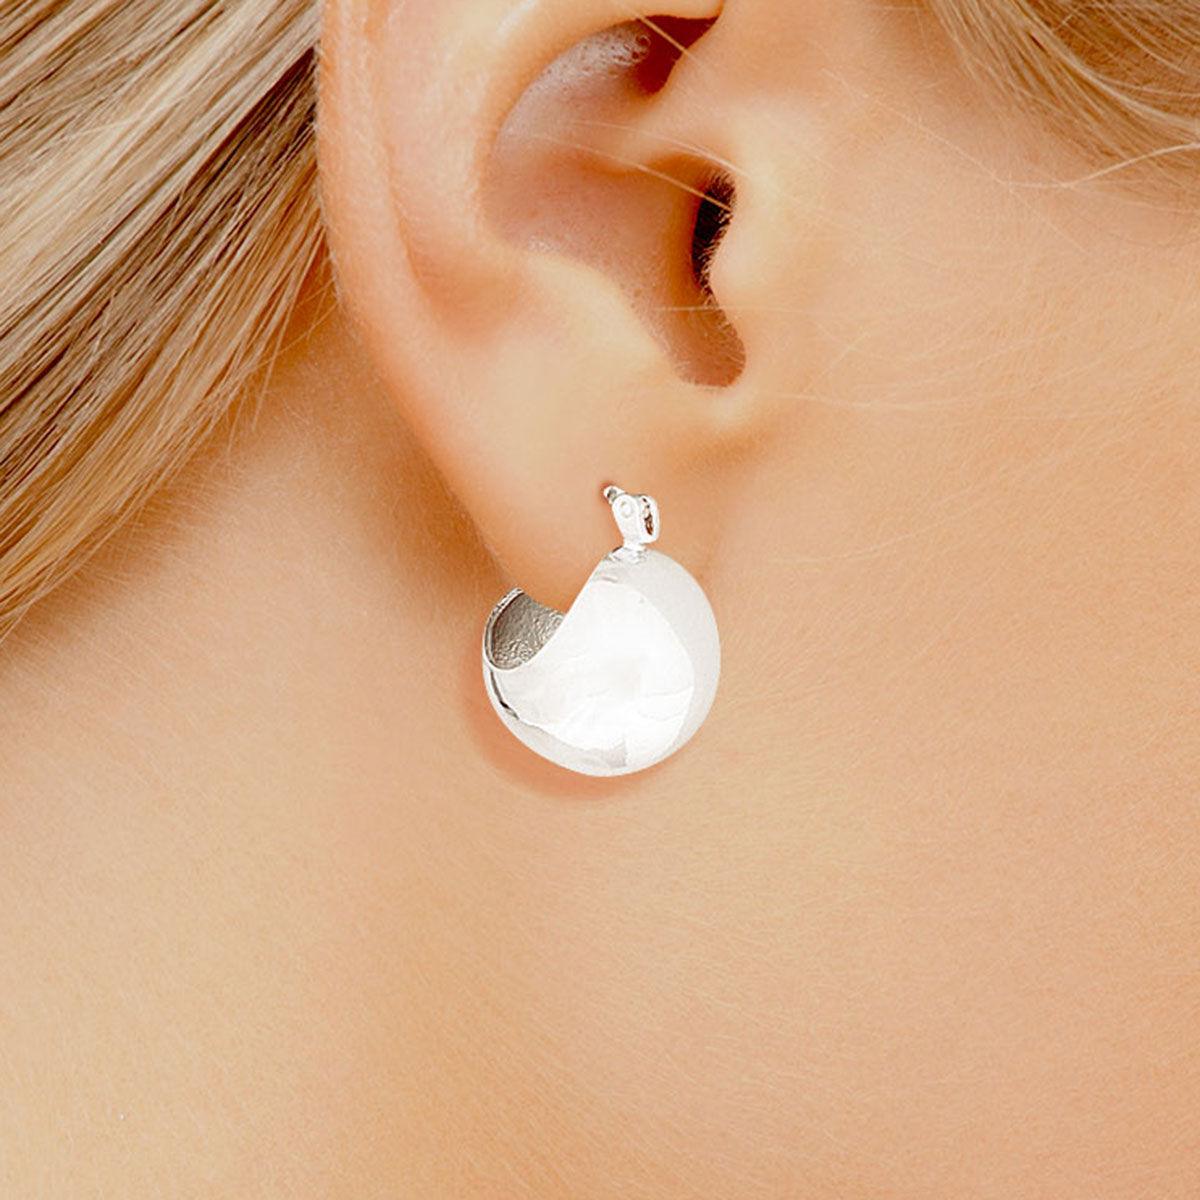 Stand Out in Style: Small White Gold Ball-hoop Earrings